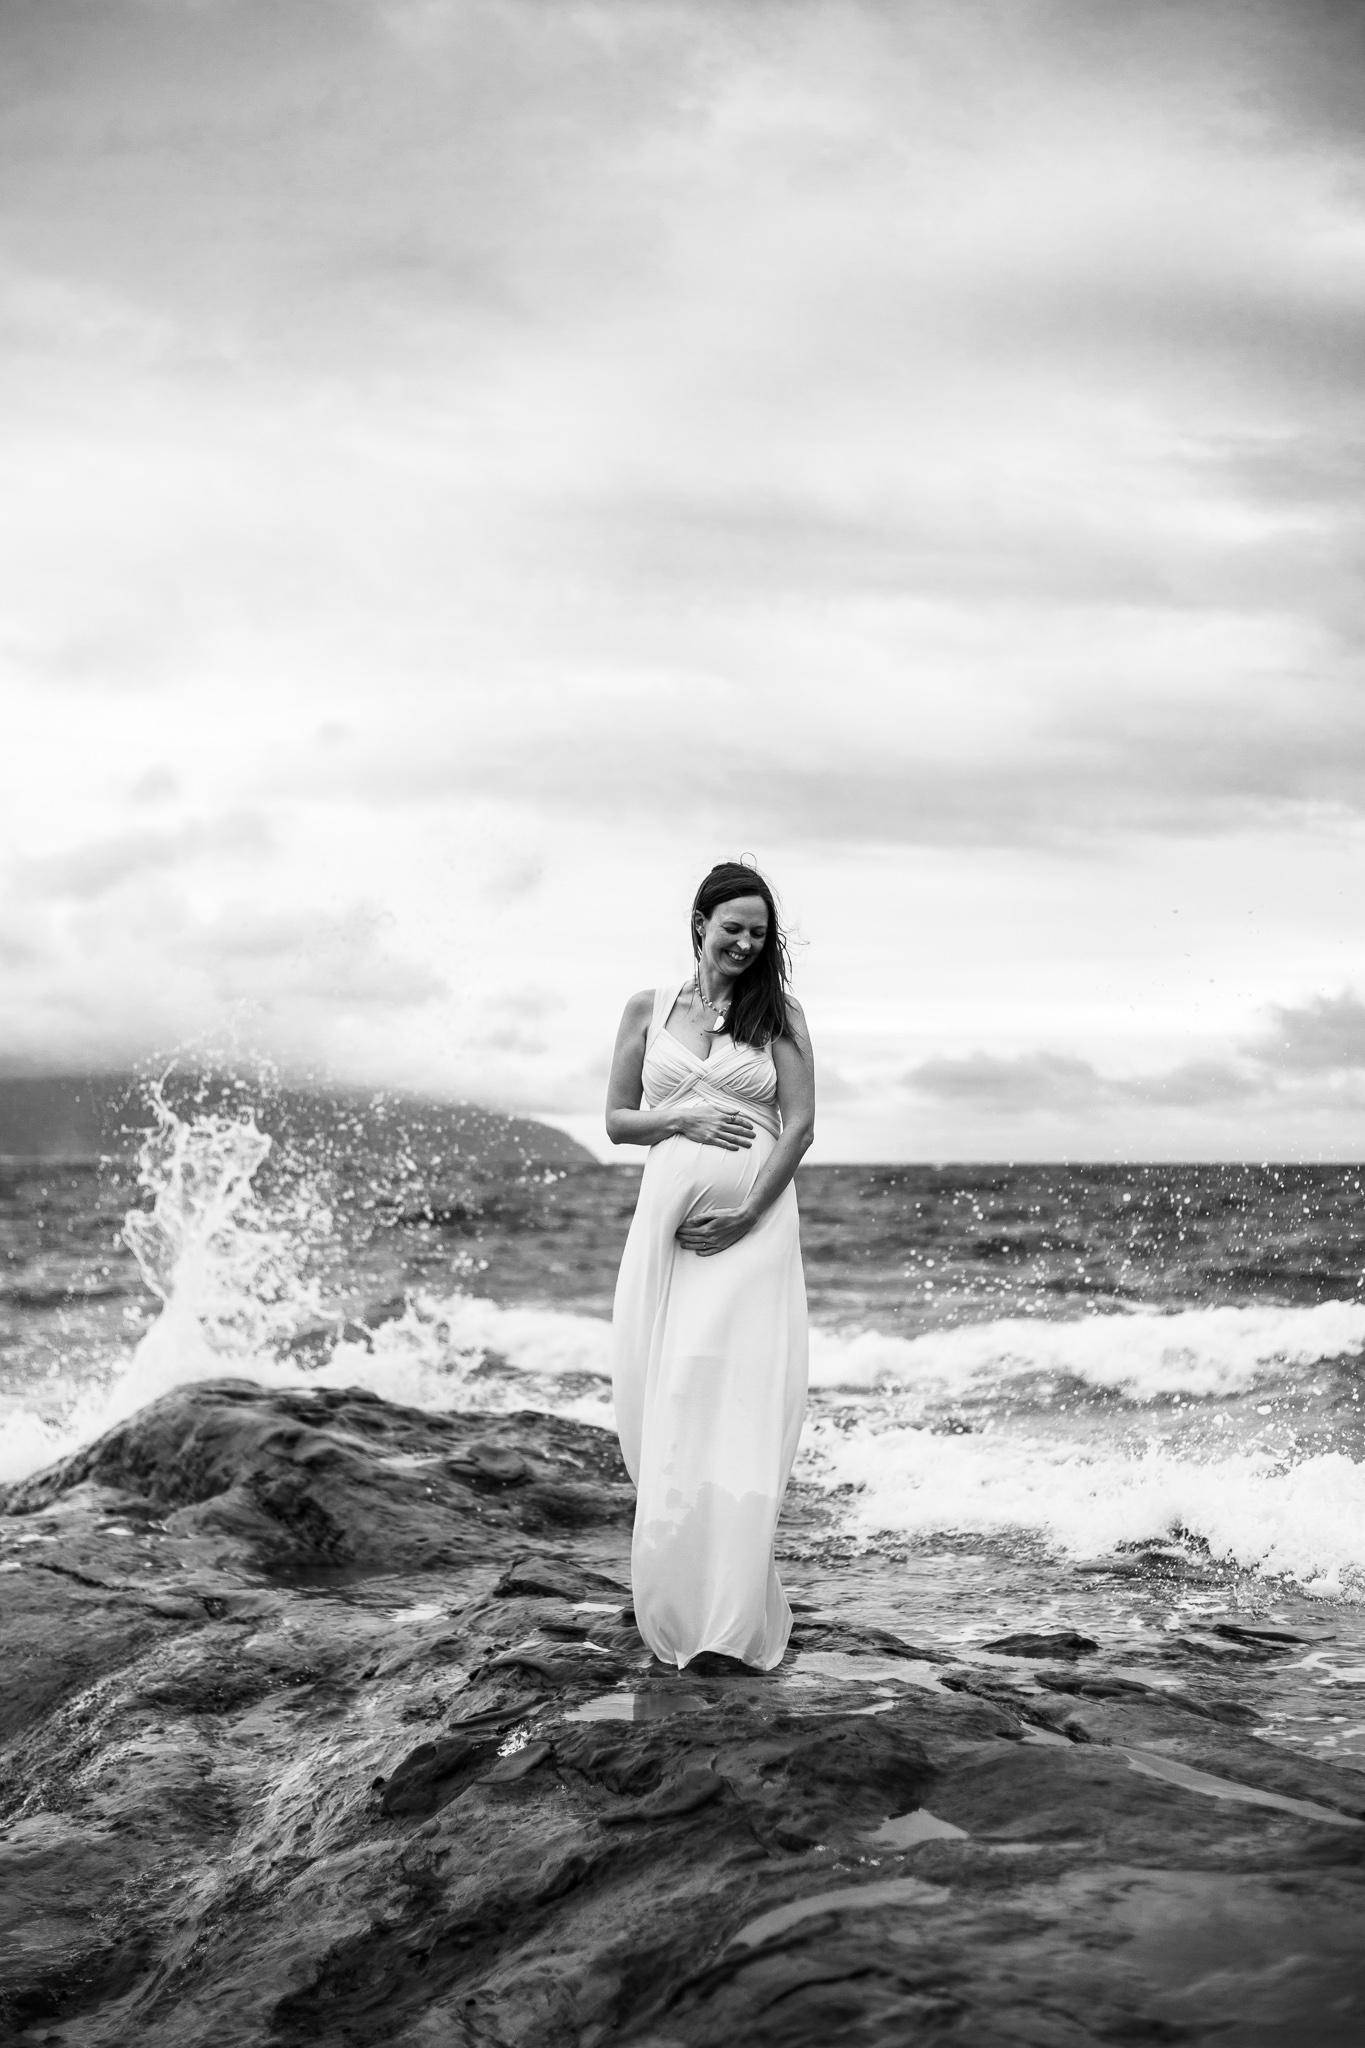 Maternity and Family photographer in Vancouver Washington Jaime Bugbee